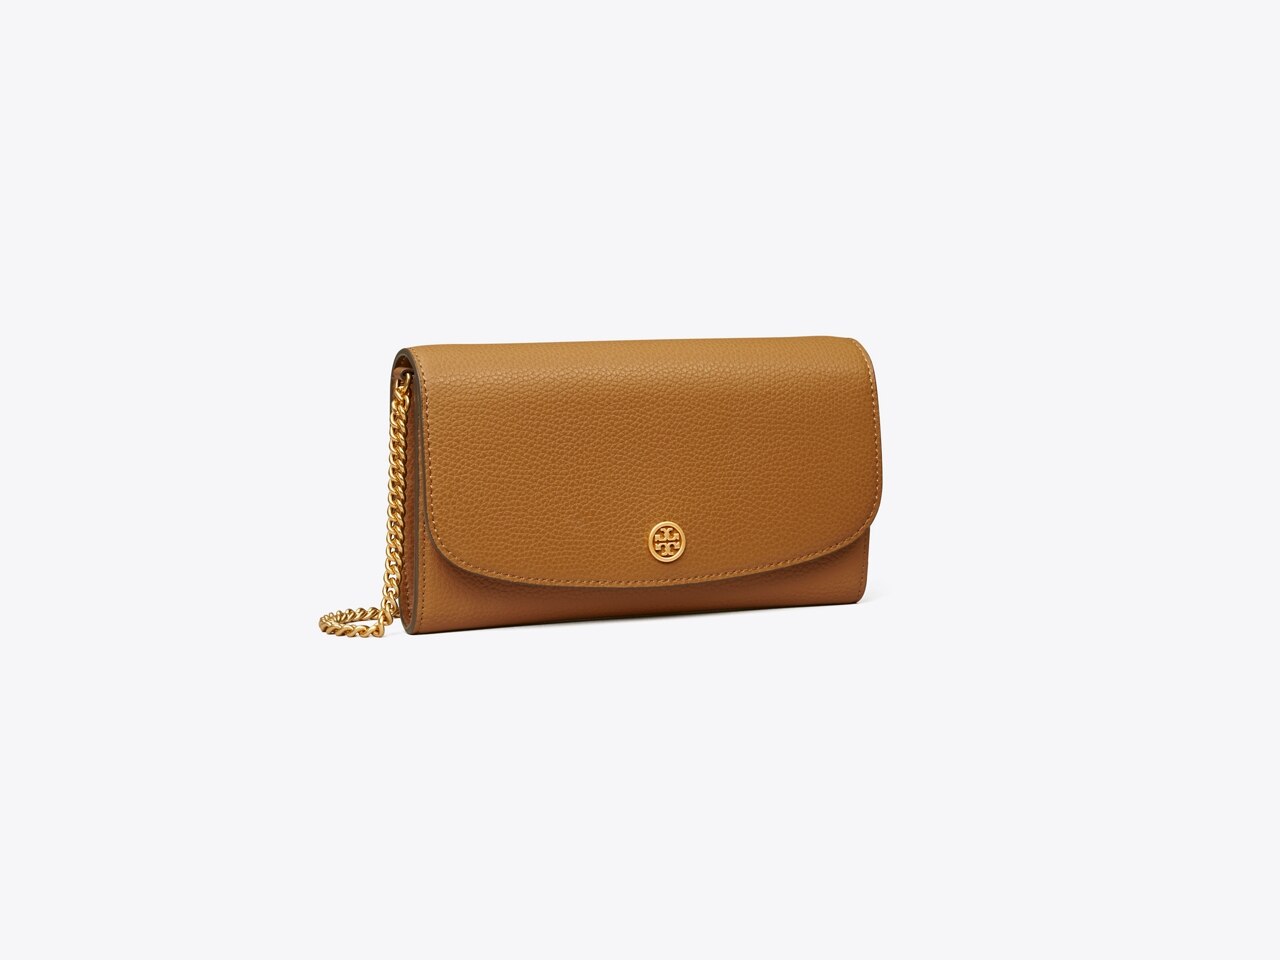 NEW - TORY BURCH Robinson Chain Wallet - Embossed Leather